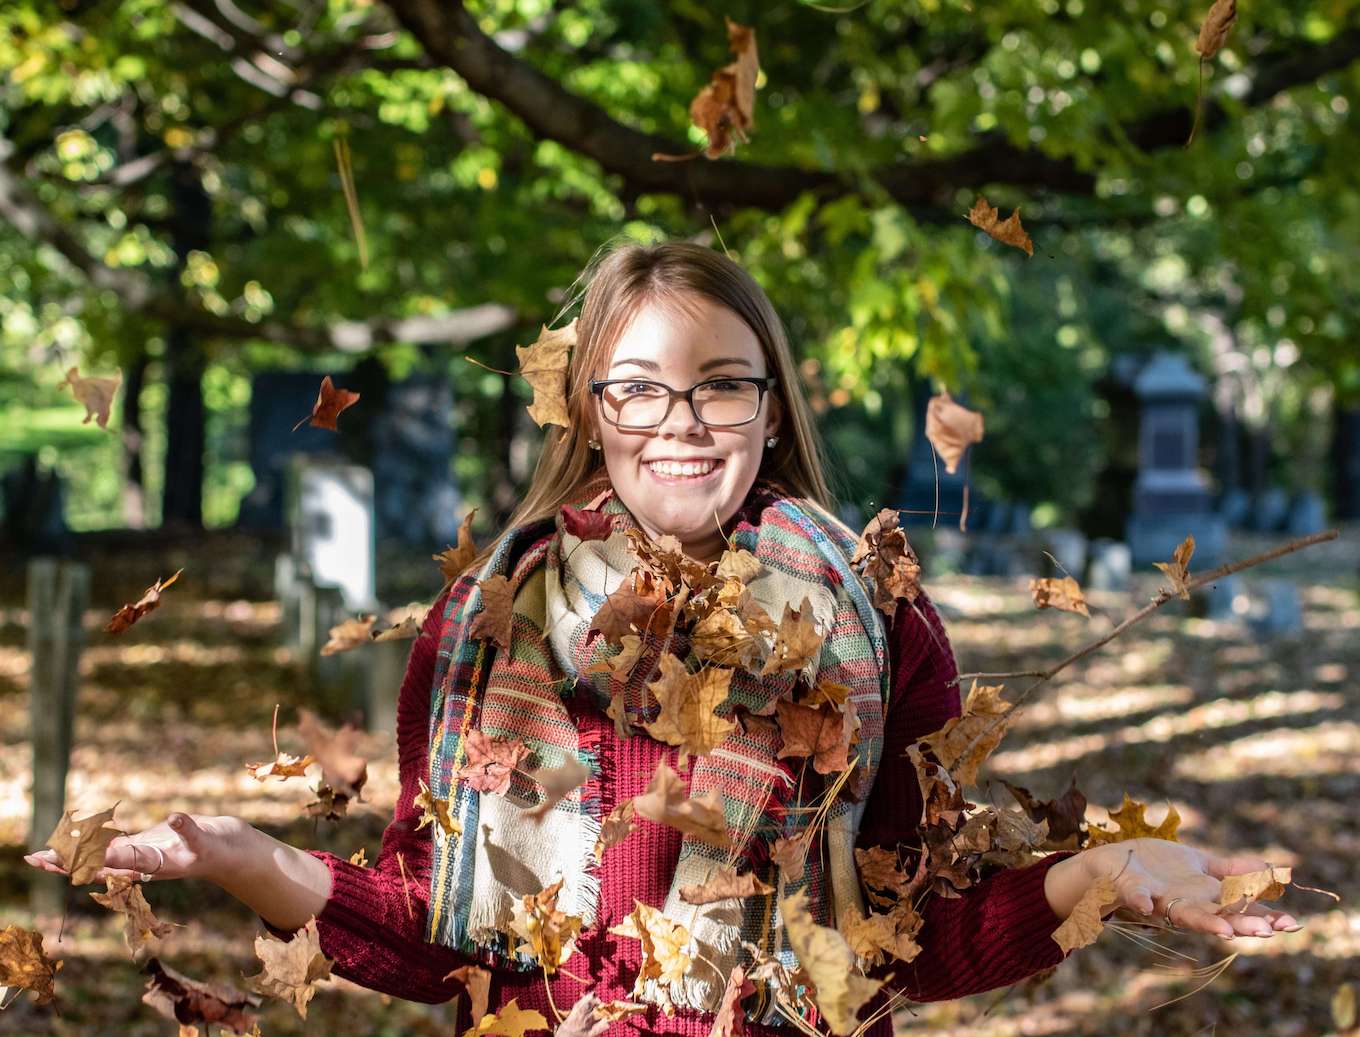 A fall portrait of a woman throwing leaves in the air.